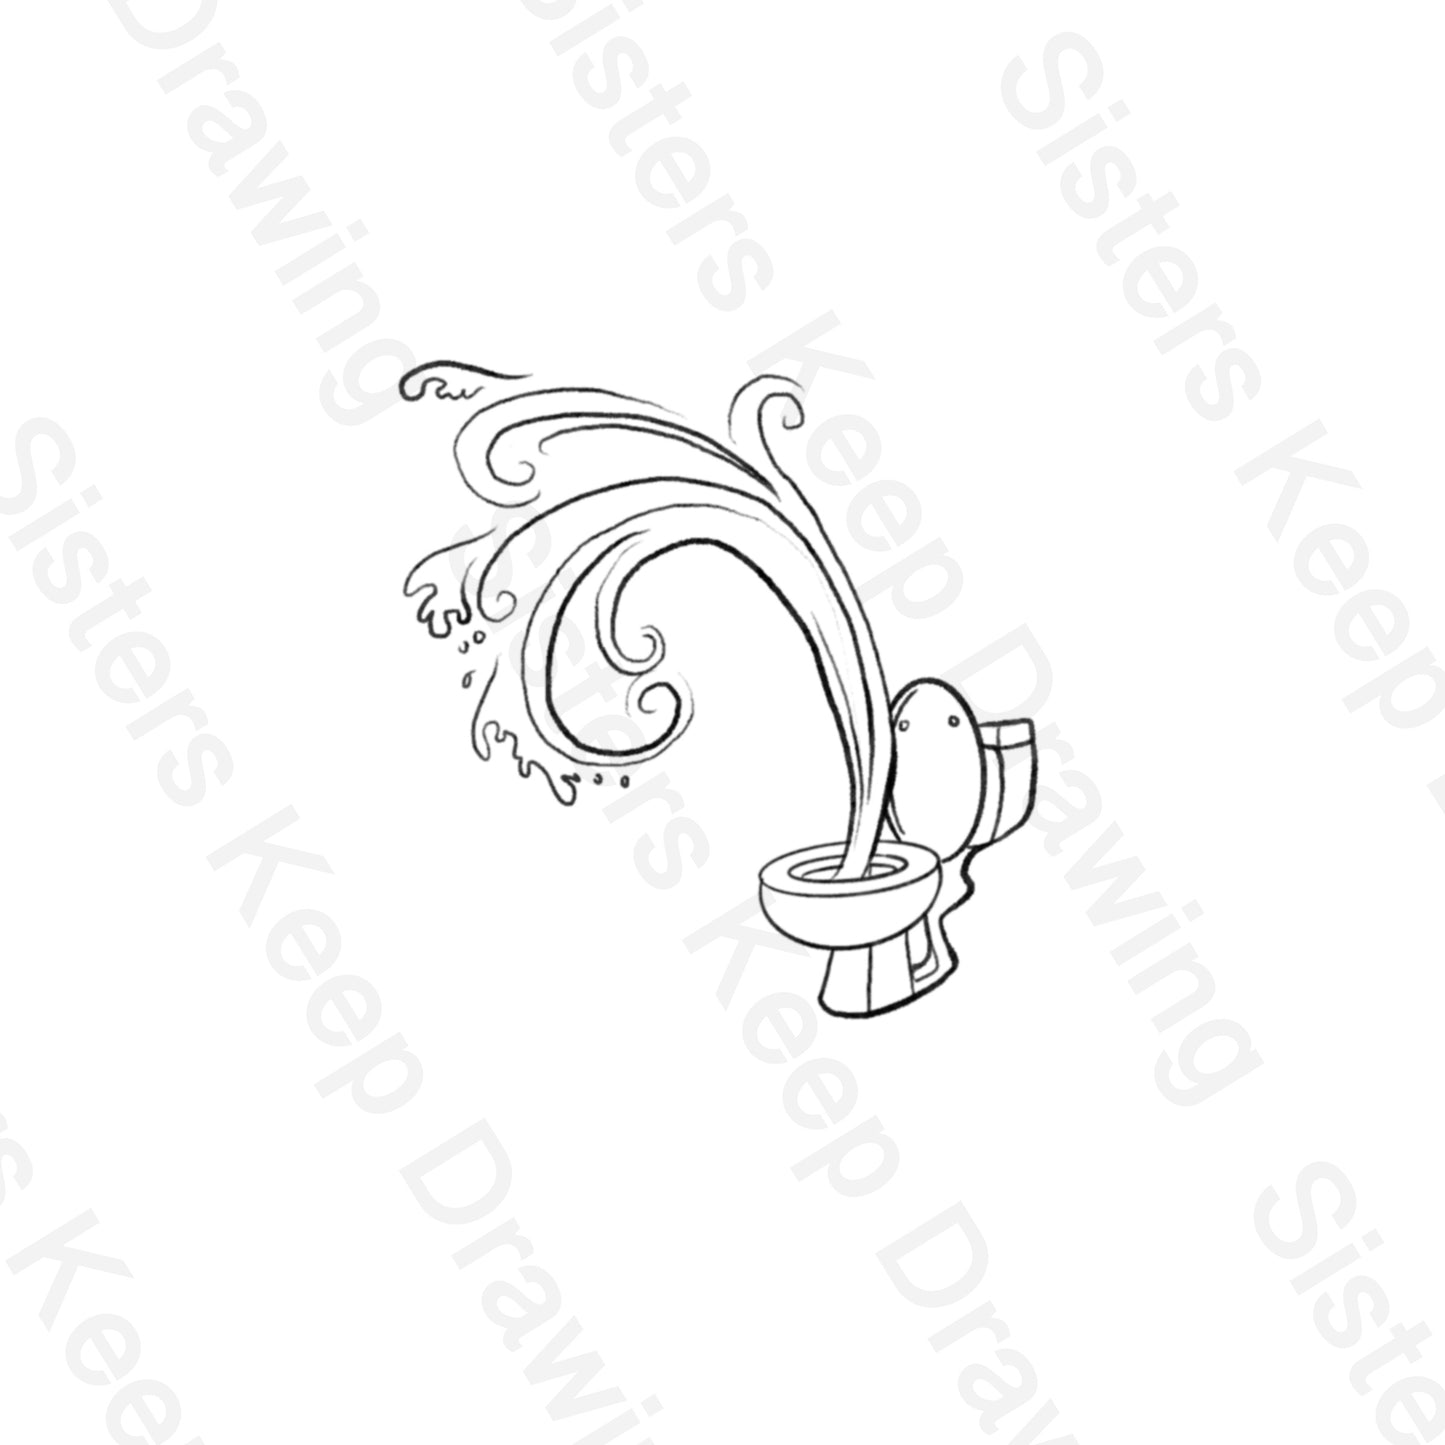 Percy jackson water from toilet  - Tattoo Transparent Permission PNG